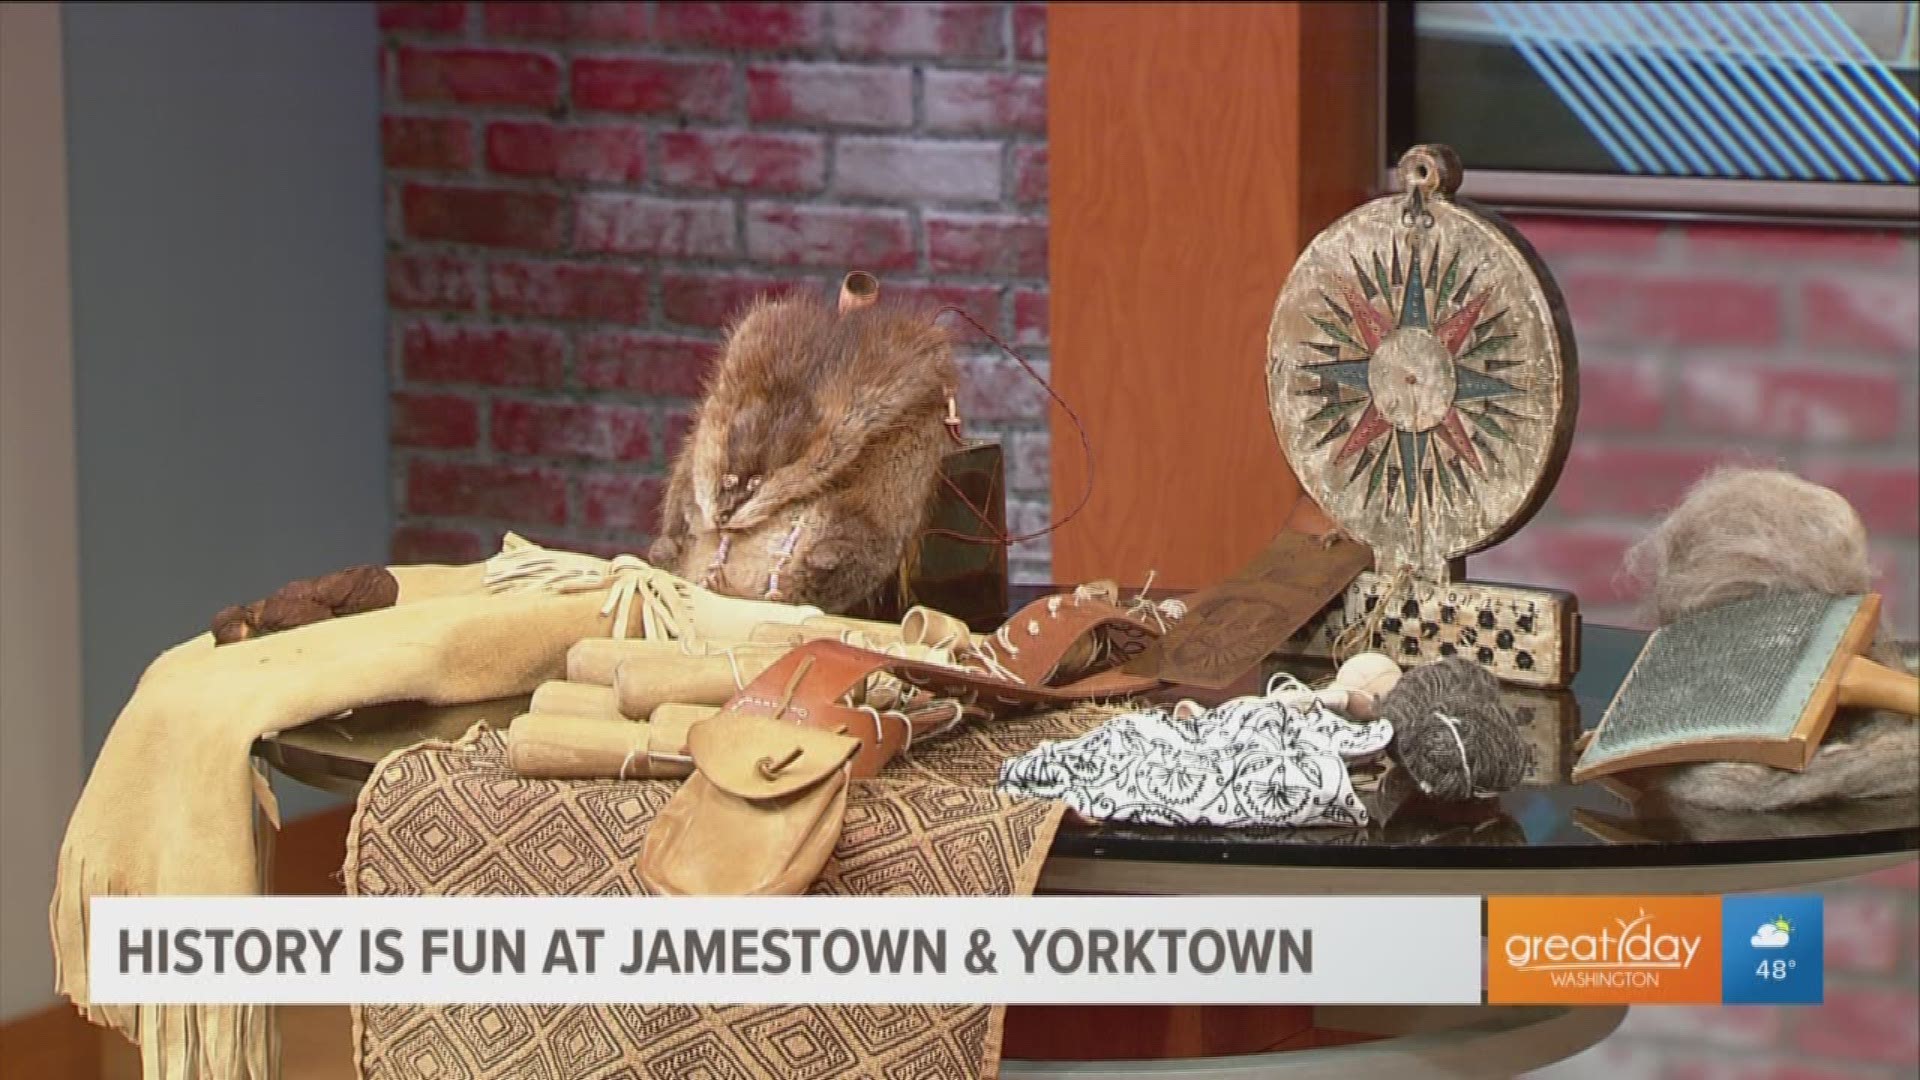 Jamie Helmick, manager of volunteer services at Jamestown Settlement Museum shares whats new and exciting at the museum this year.